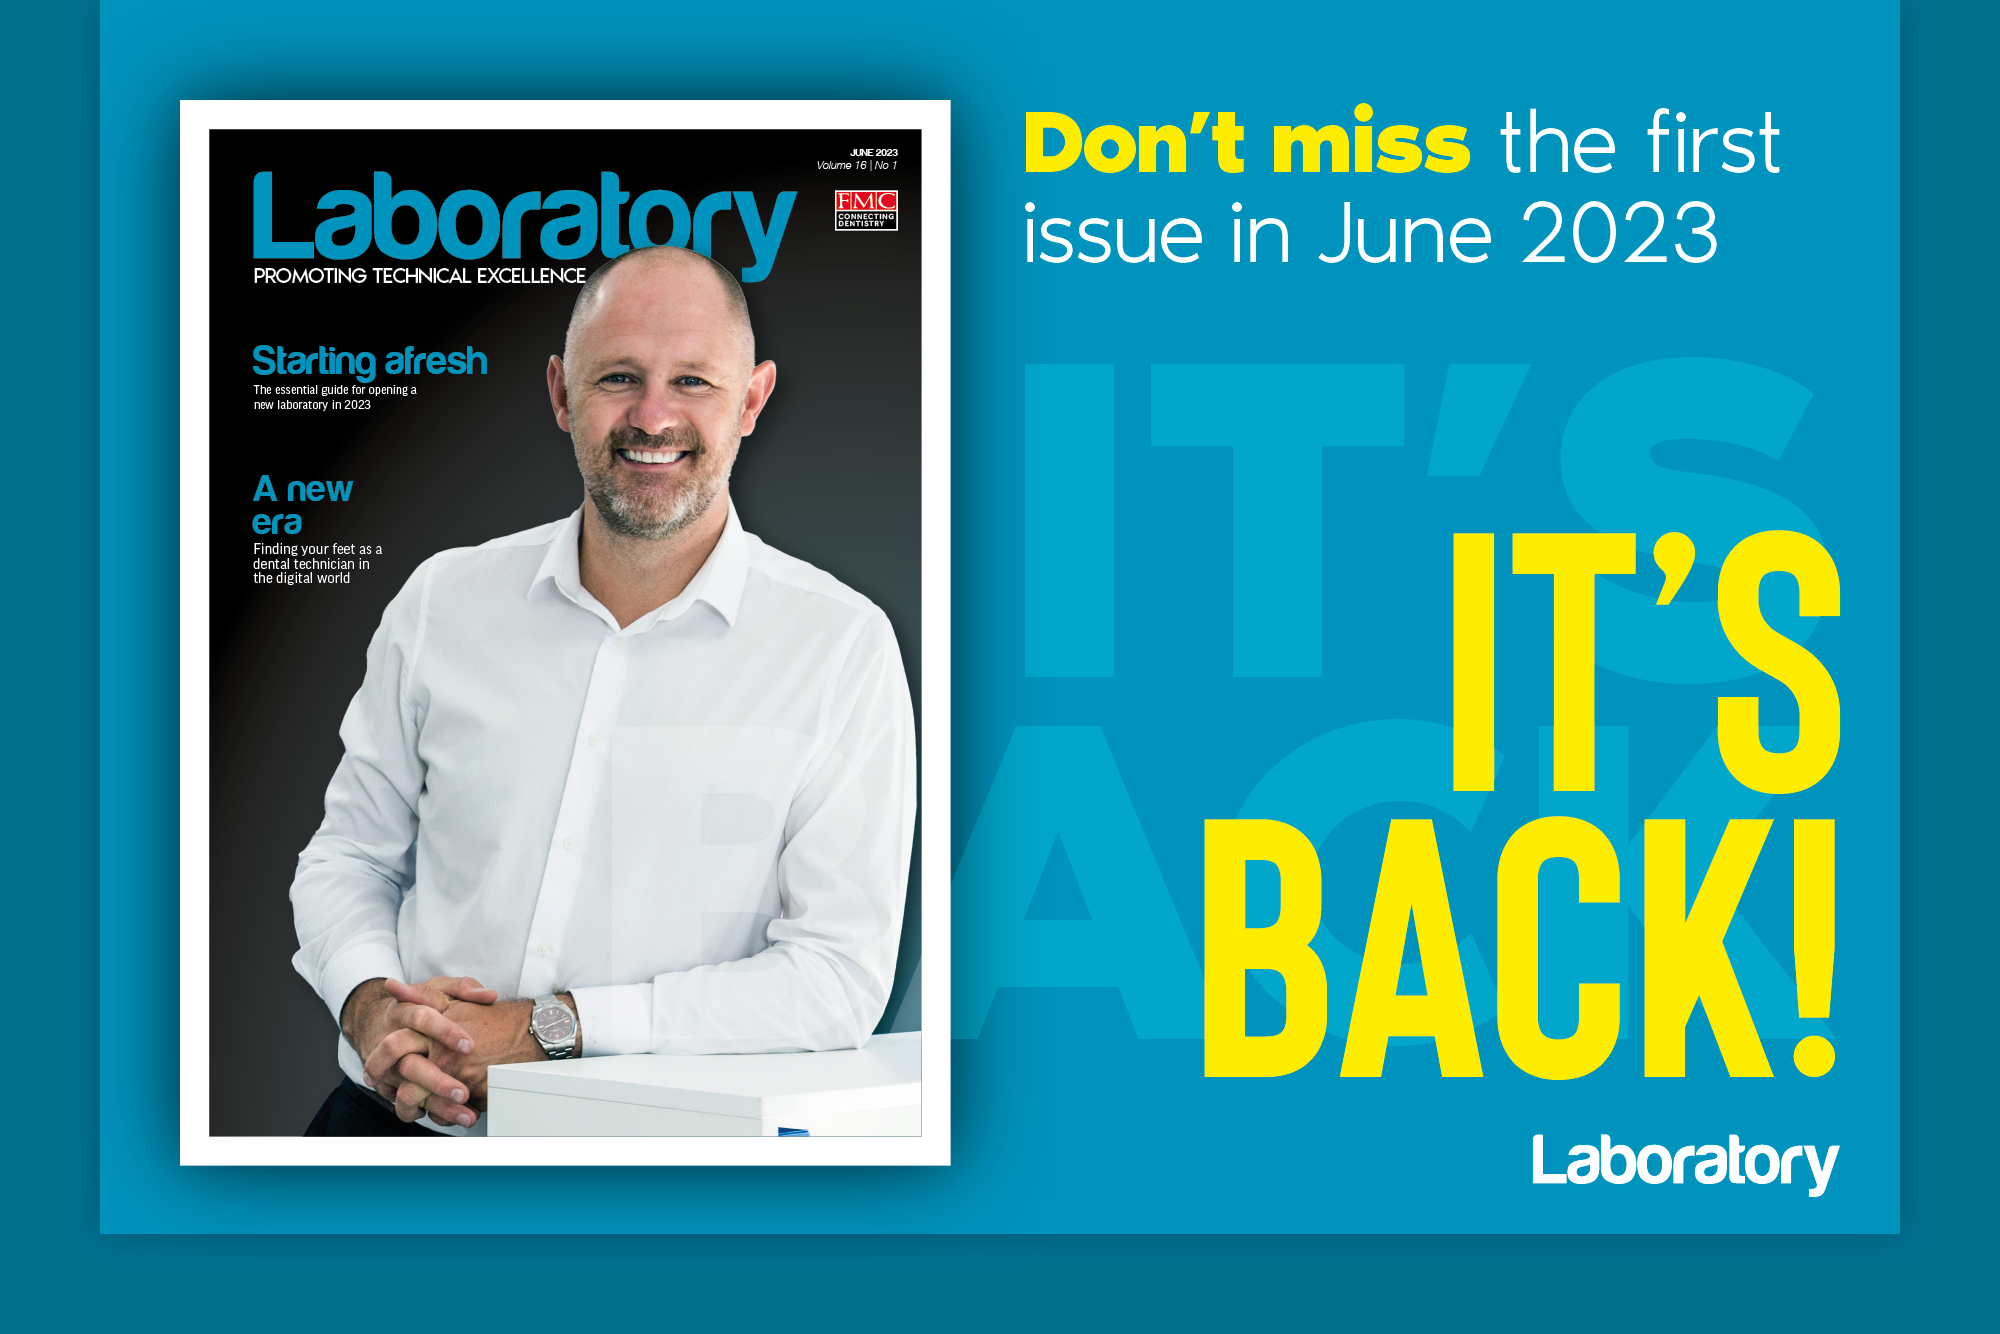 FMC is delighted to announce the relaunch of Laboratory magazine – a publication dedicated to promoting technical excellence.